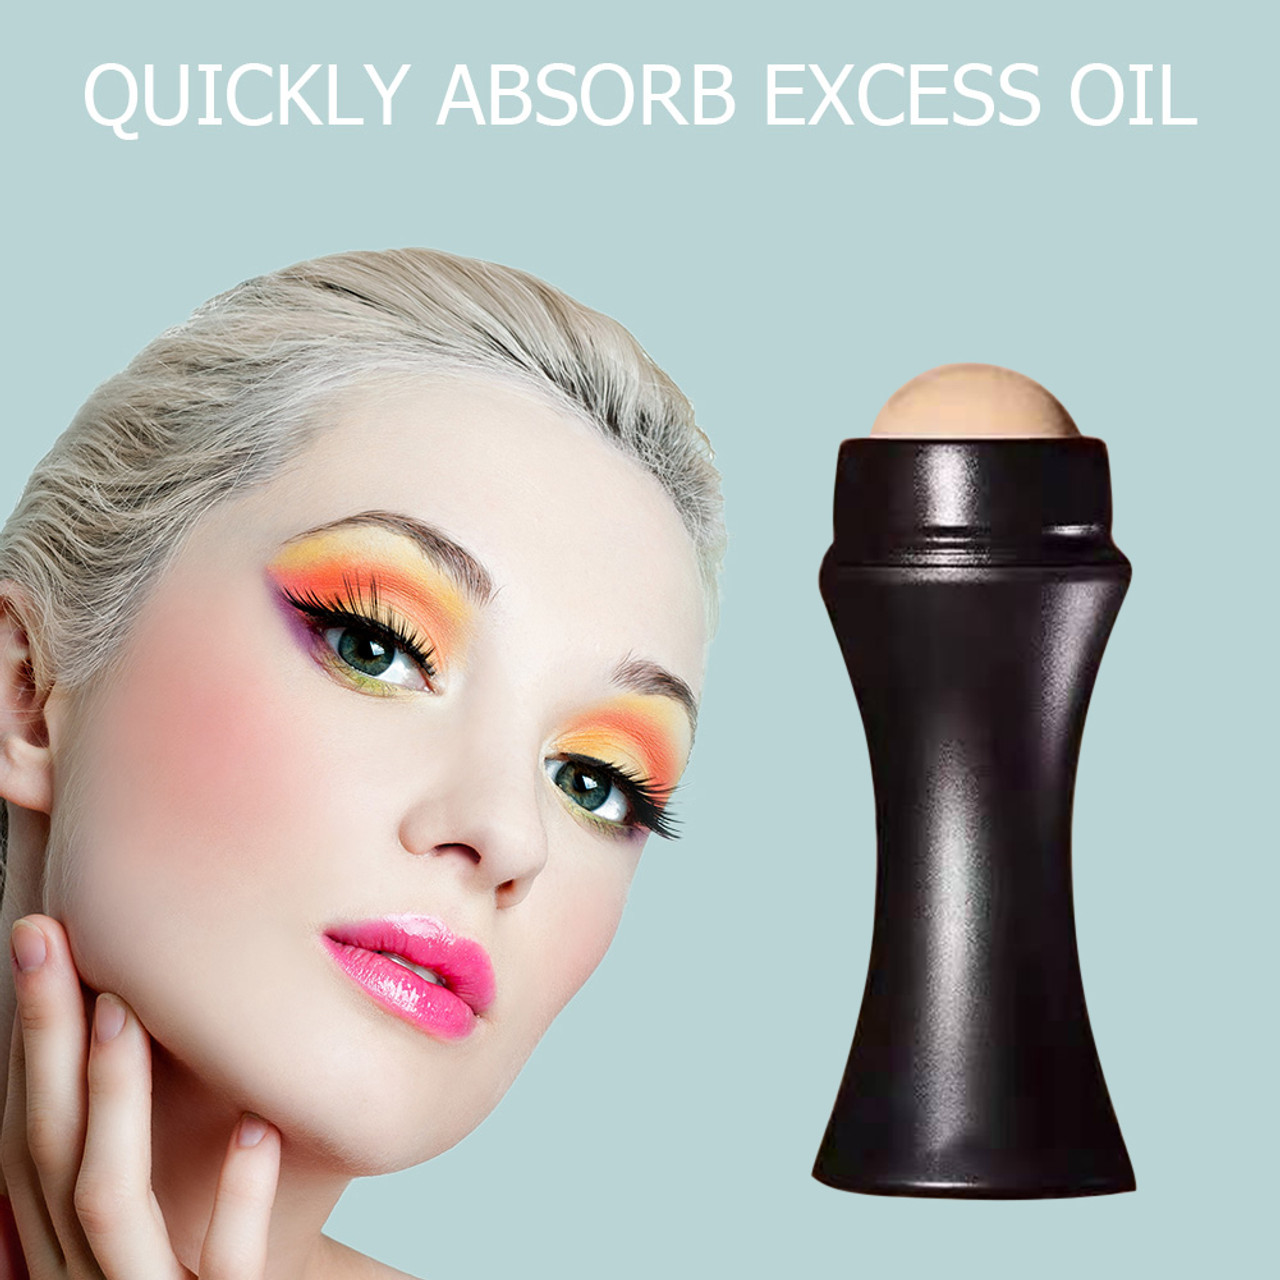 Volcanic Stone Oil-Absorbing Facial Roller product image